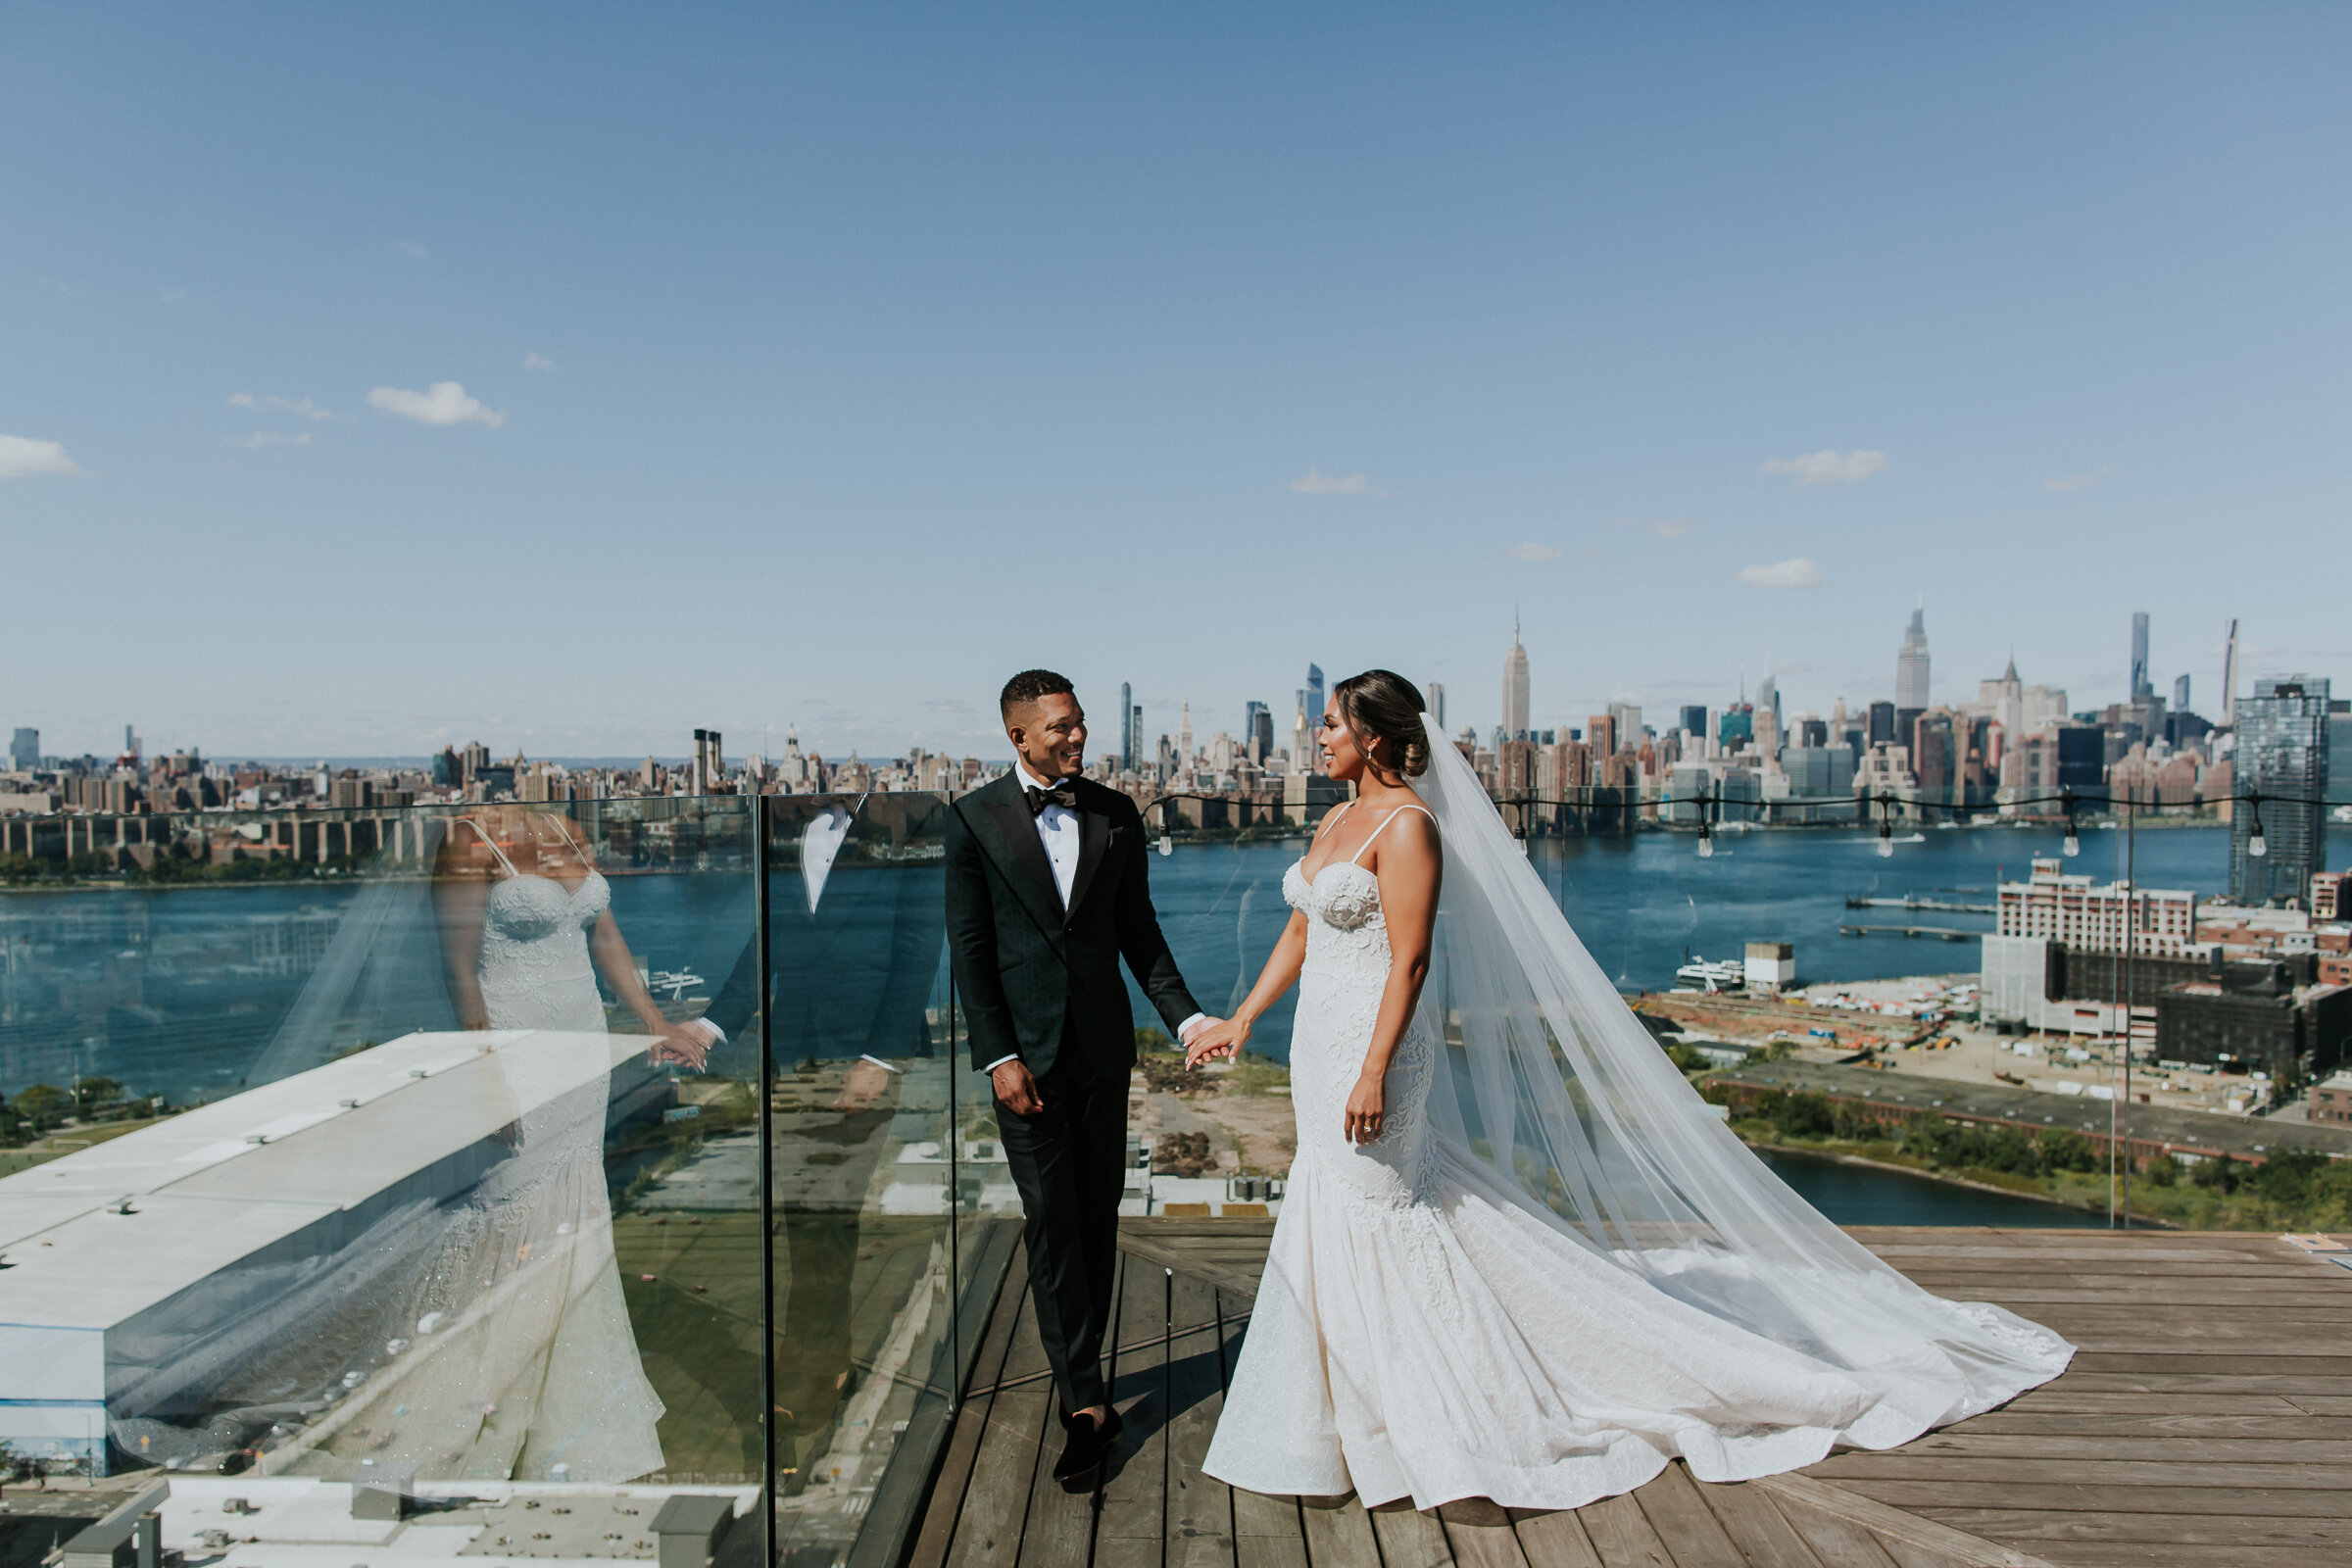 Rhodette and Ian had a whole rooftop to celebrate with guests with these killer city views!   